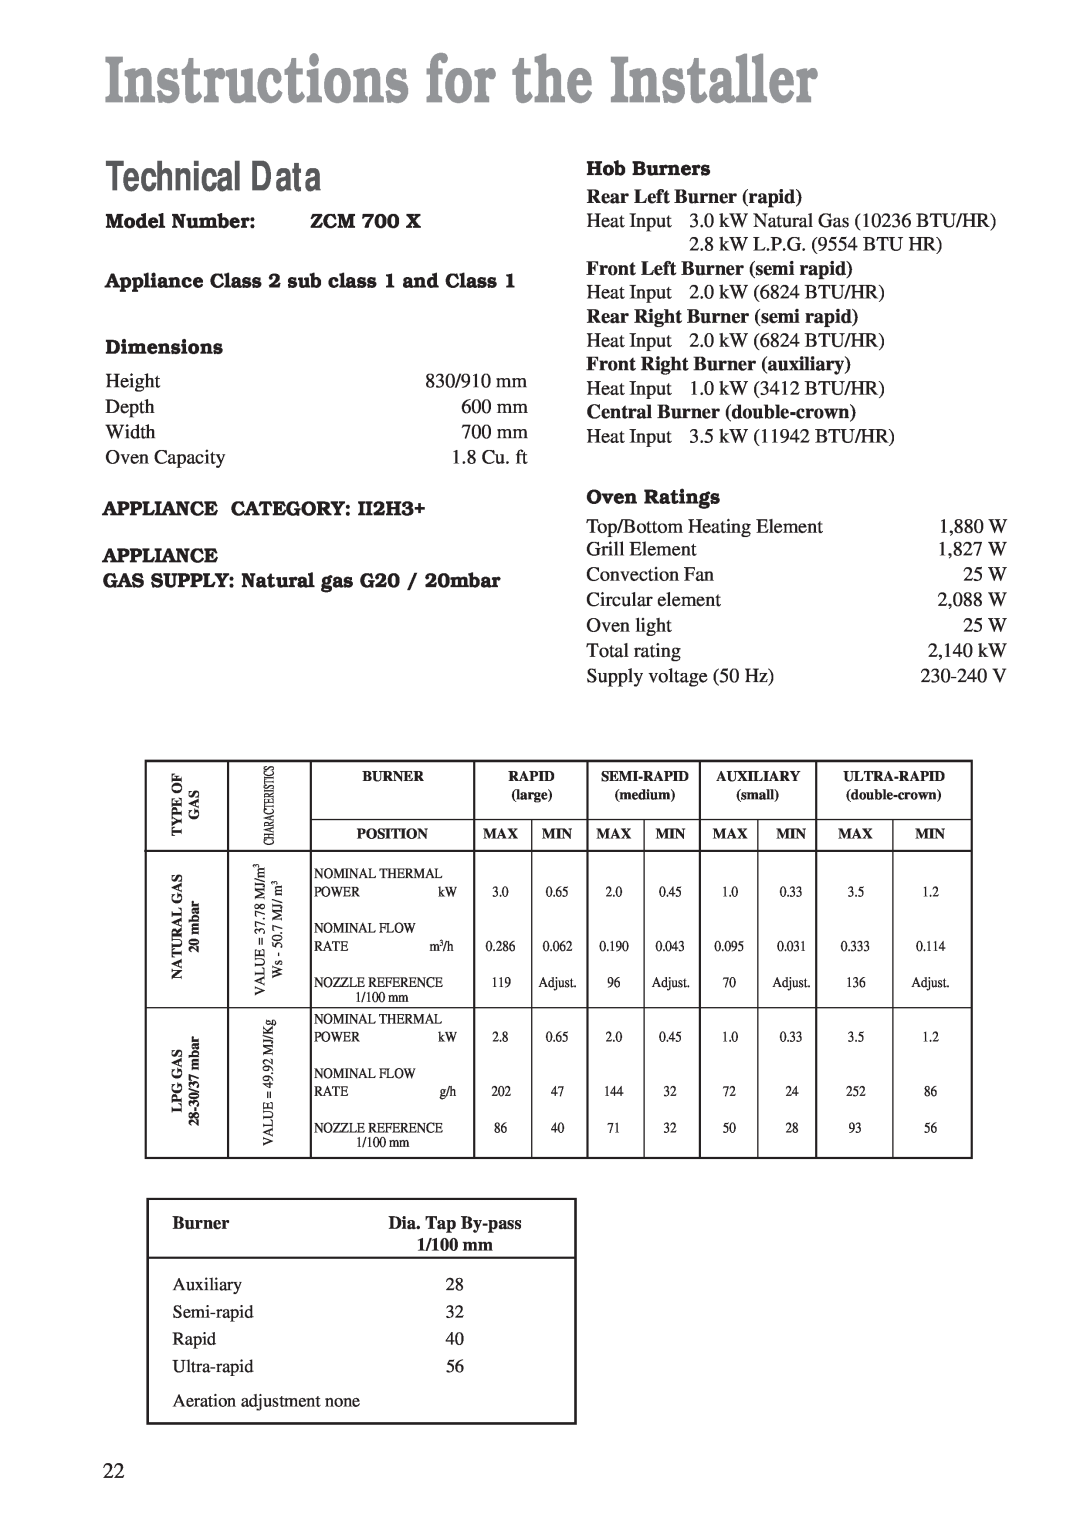 Zanussi ZCM 700 X manual Instructions for the Installer, Technical Data, Model Number, Zcm, Dimensions, Oven Ratings 